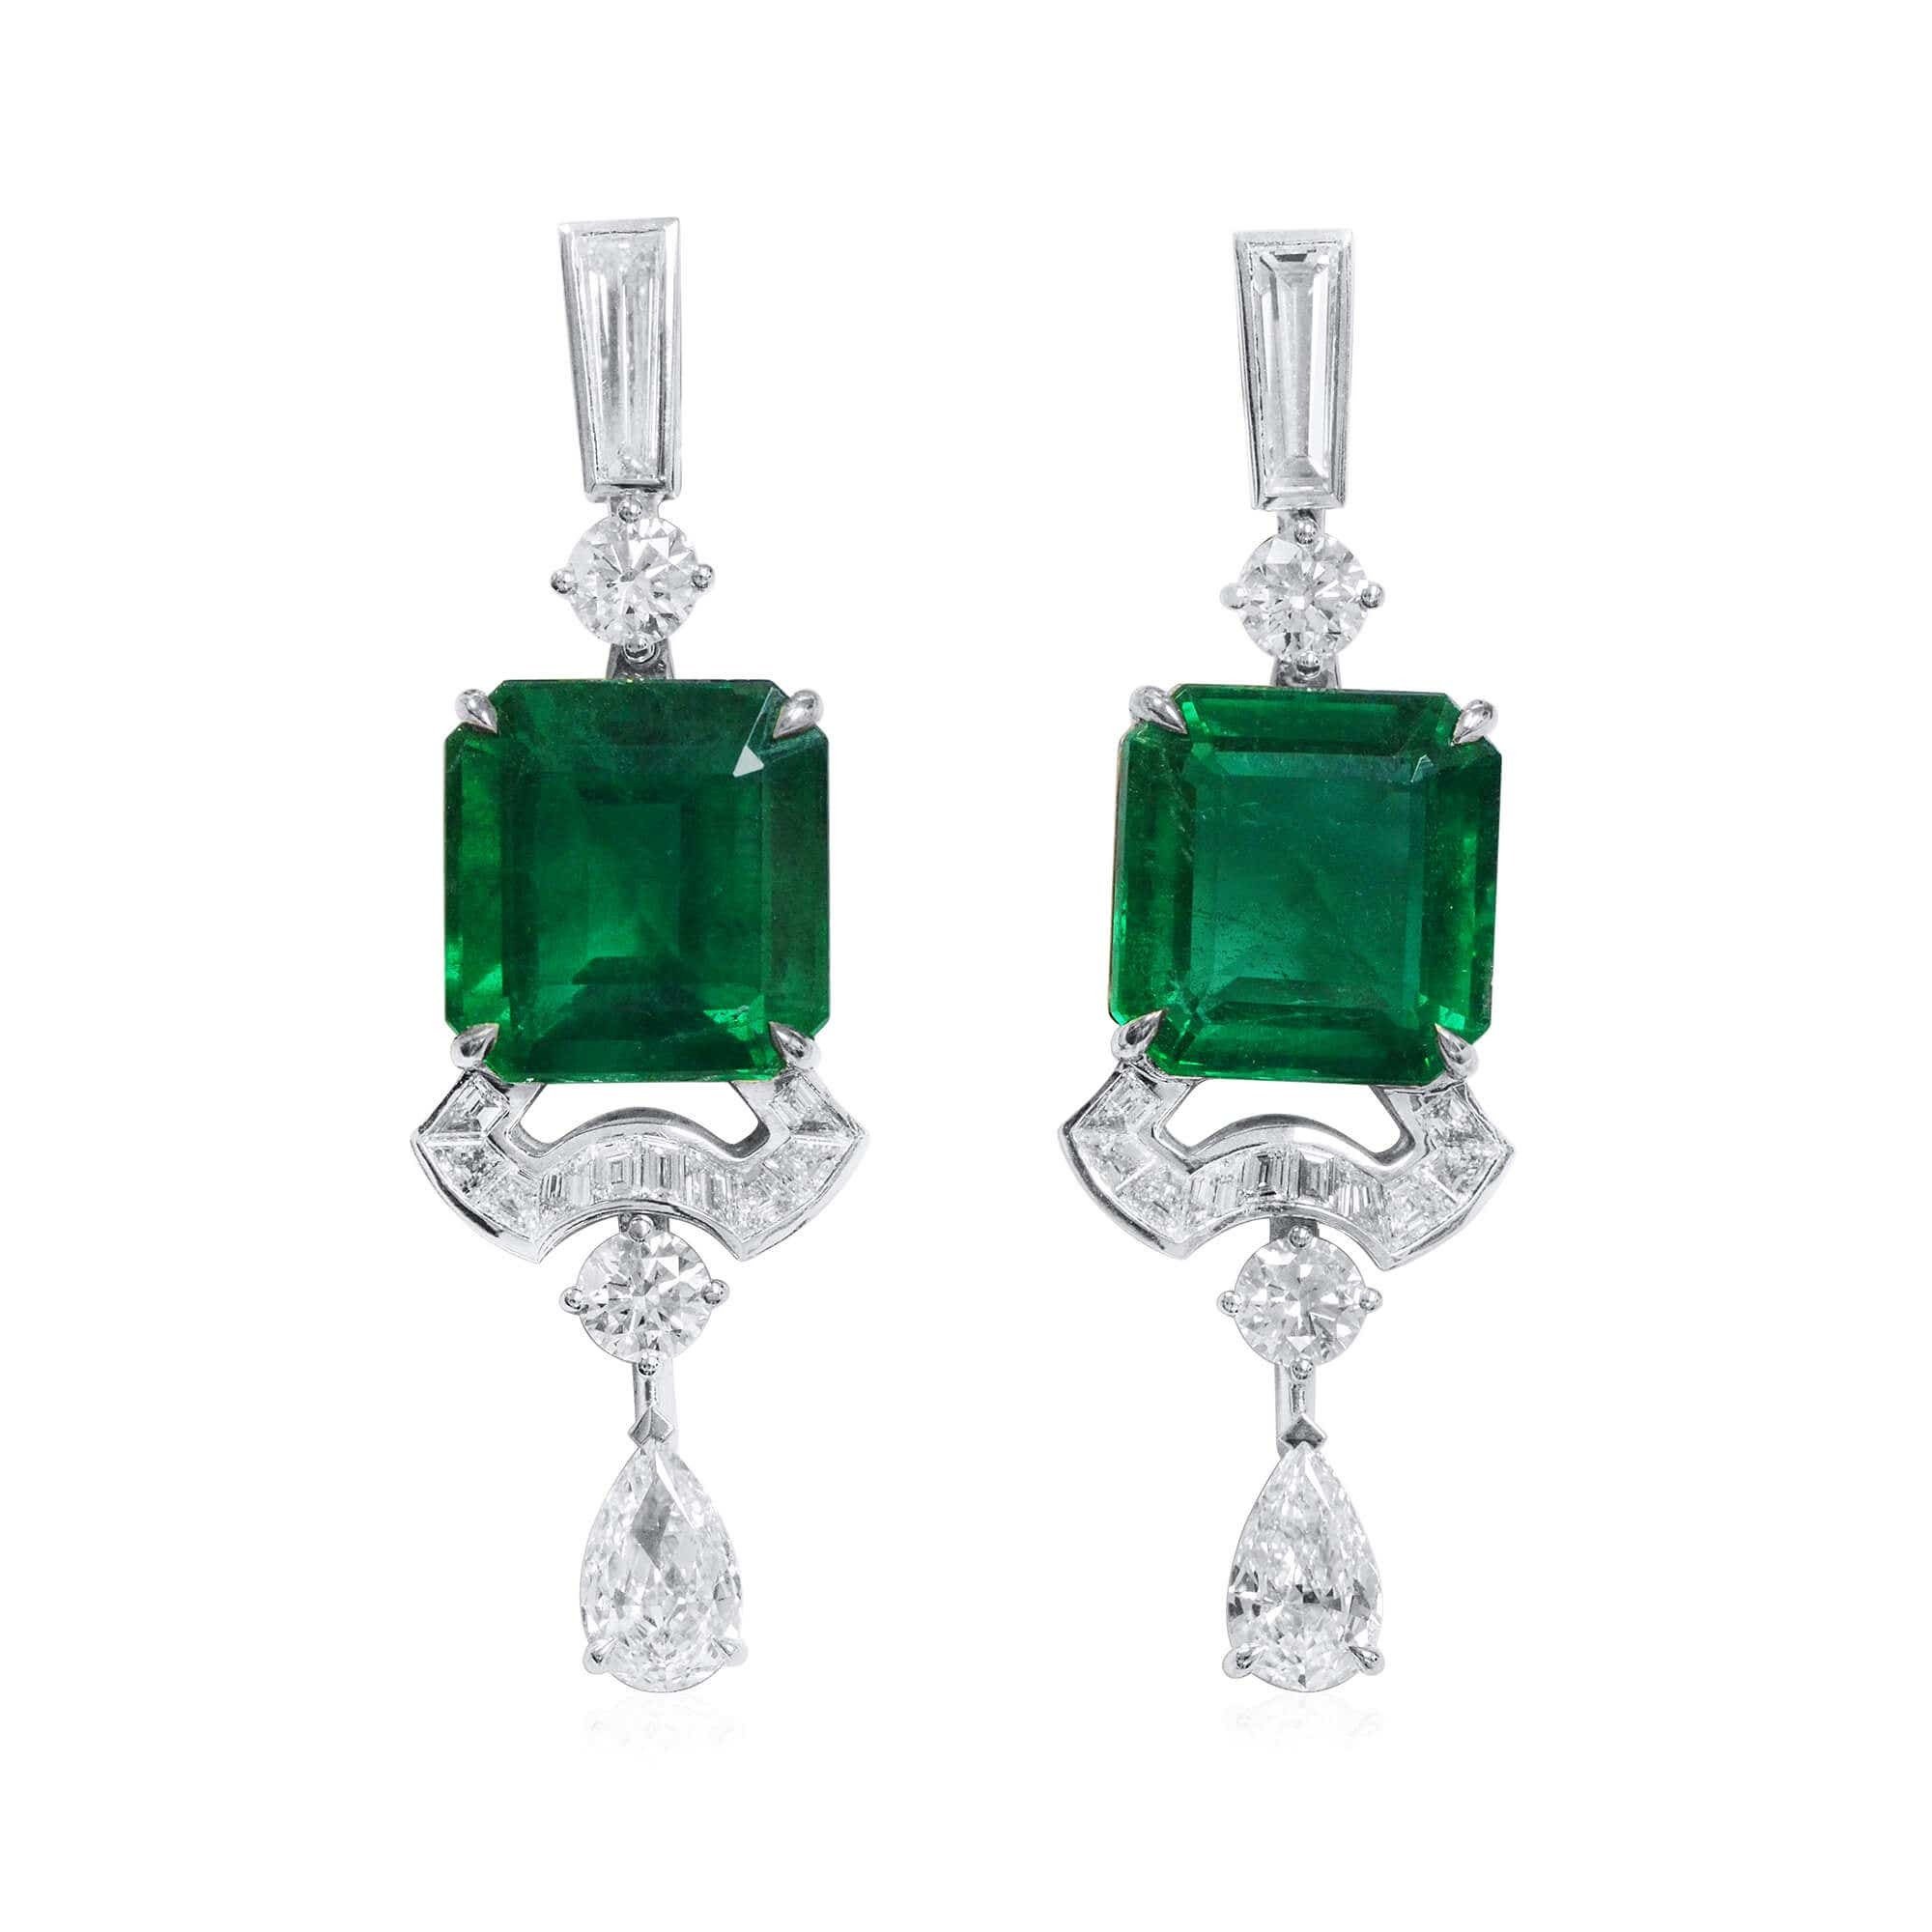 Vivid Green Emerald And Diamond Earrings, 15.45 Ct. (19.02 In United ...